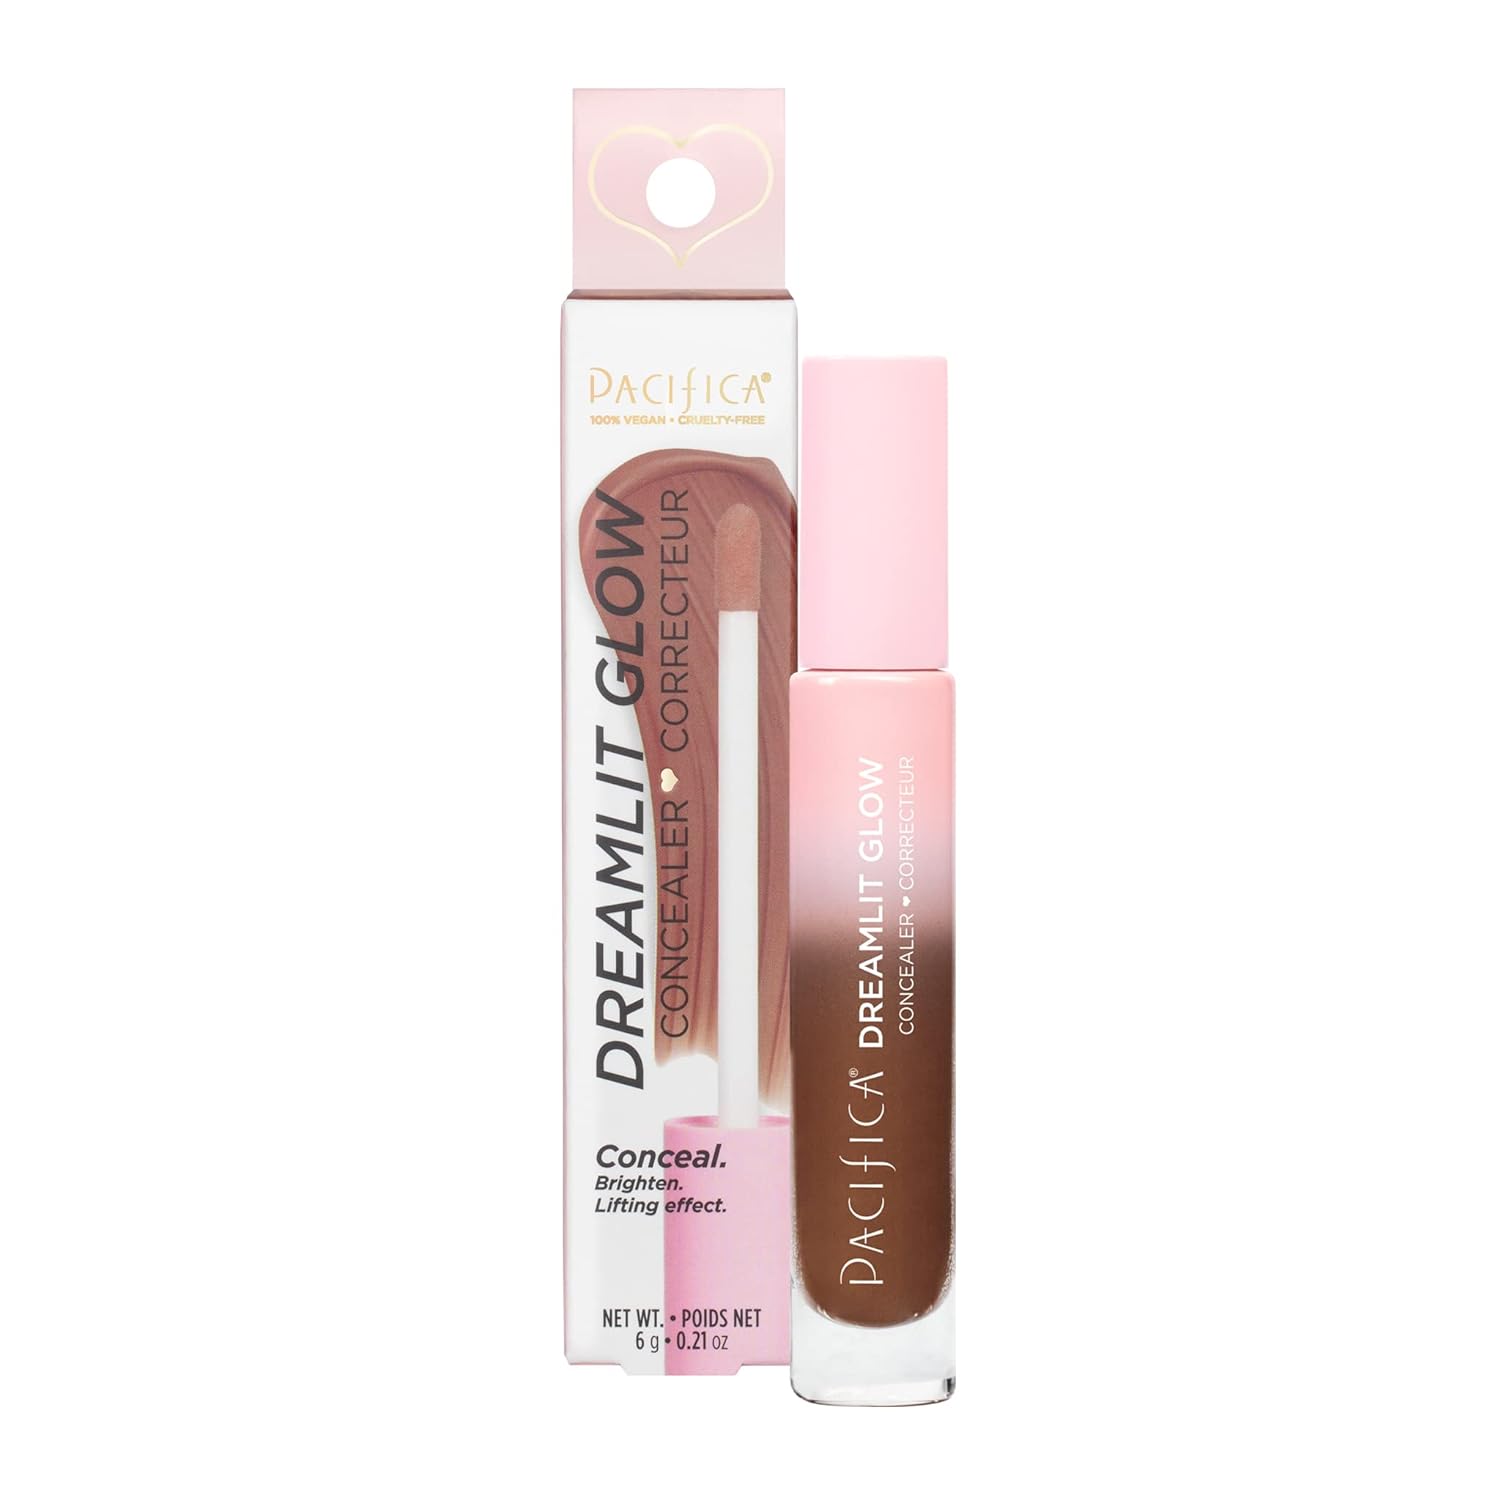 Pacifica Beauty, DreamLit Glow Concealer -Shade 03, Multi-Use Concealer, Conceals, Corrects, Covers, Puffy Eyes and Dark Circles Treatment, Plant-Based Formula, Lightweight, Long Lasting, Vegan